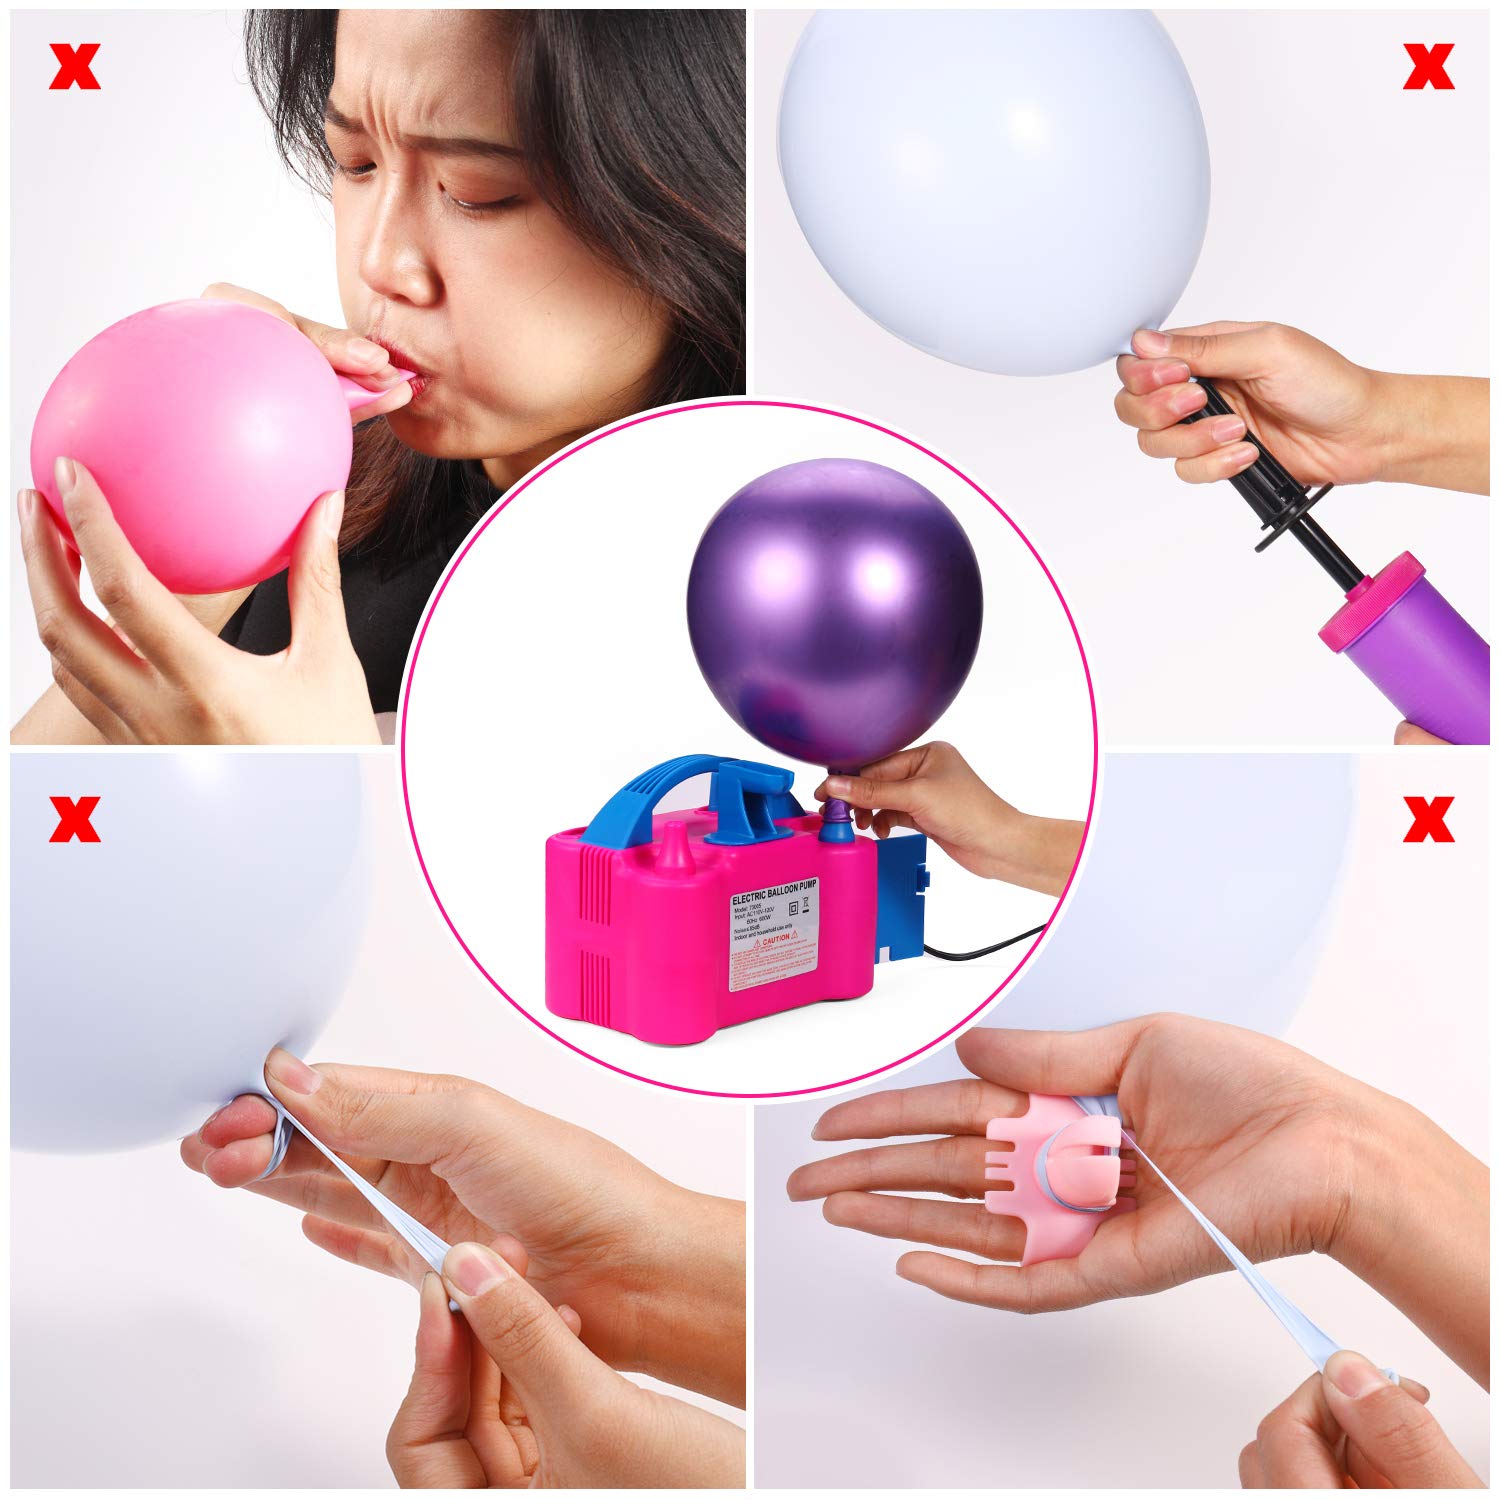 PCFING Electric Air Balloon Pump and Balloon Tying Tool in One, Portable Dual Nozzle Electric Balloon Blower Air Pump Balloons Inflator with Tying Tool on Pump for Decoration, Party and Save Time